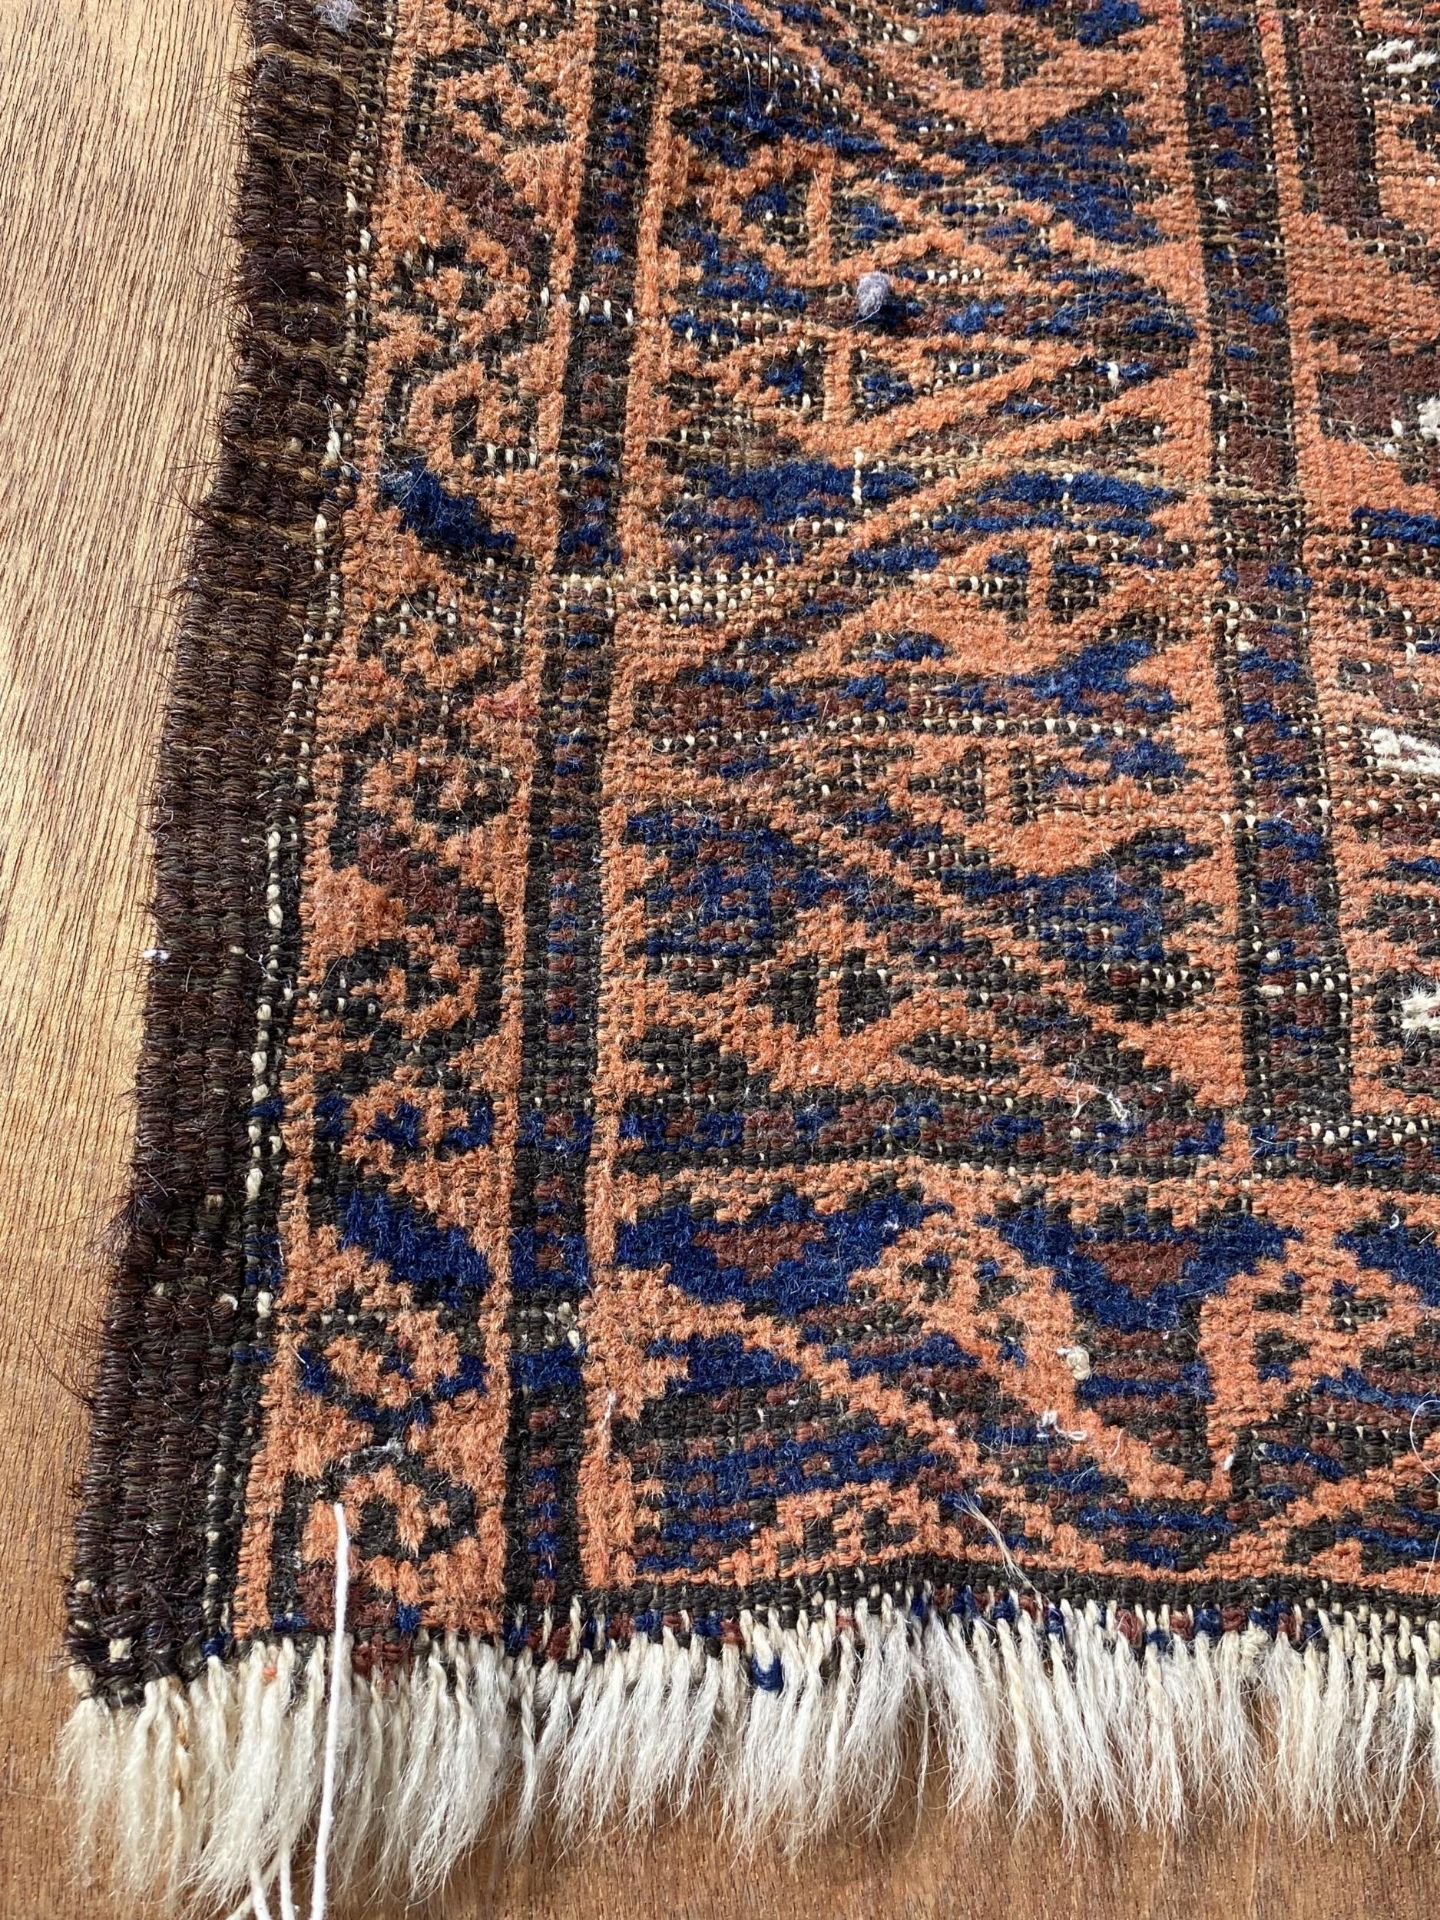 AN ORANAGE AND BLUE PATTERNED RUG - Image 2 of 2